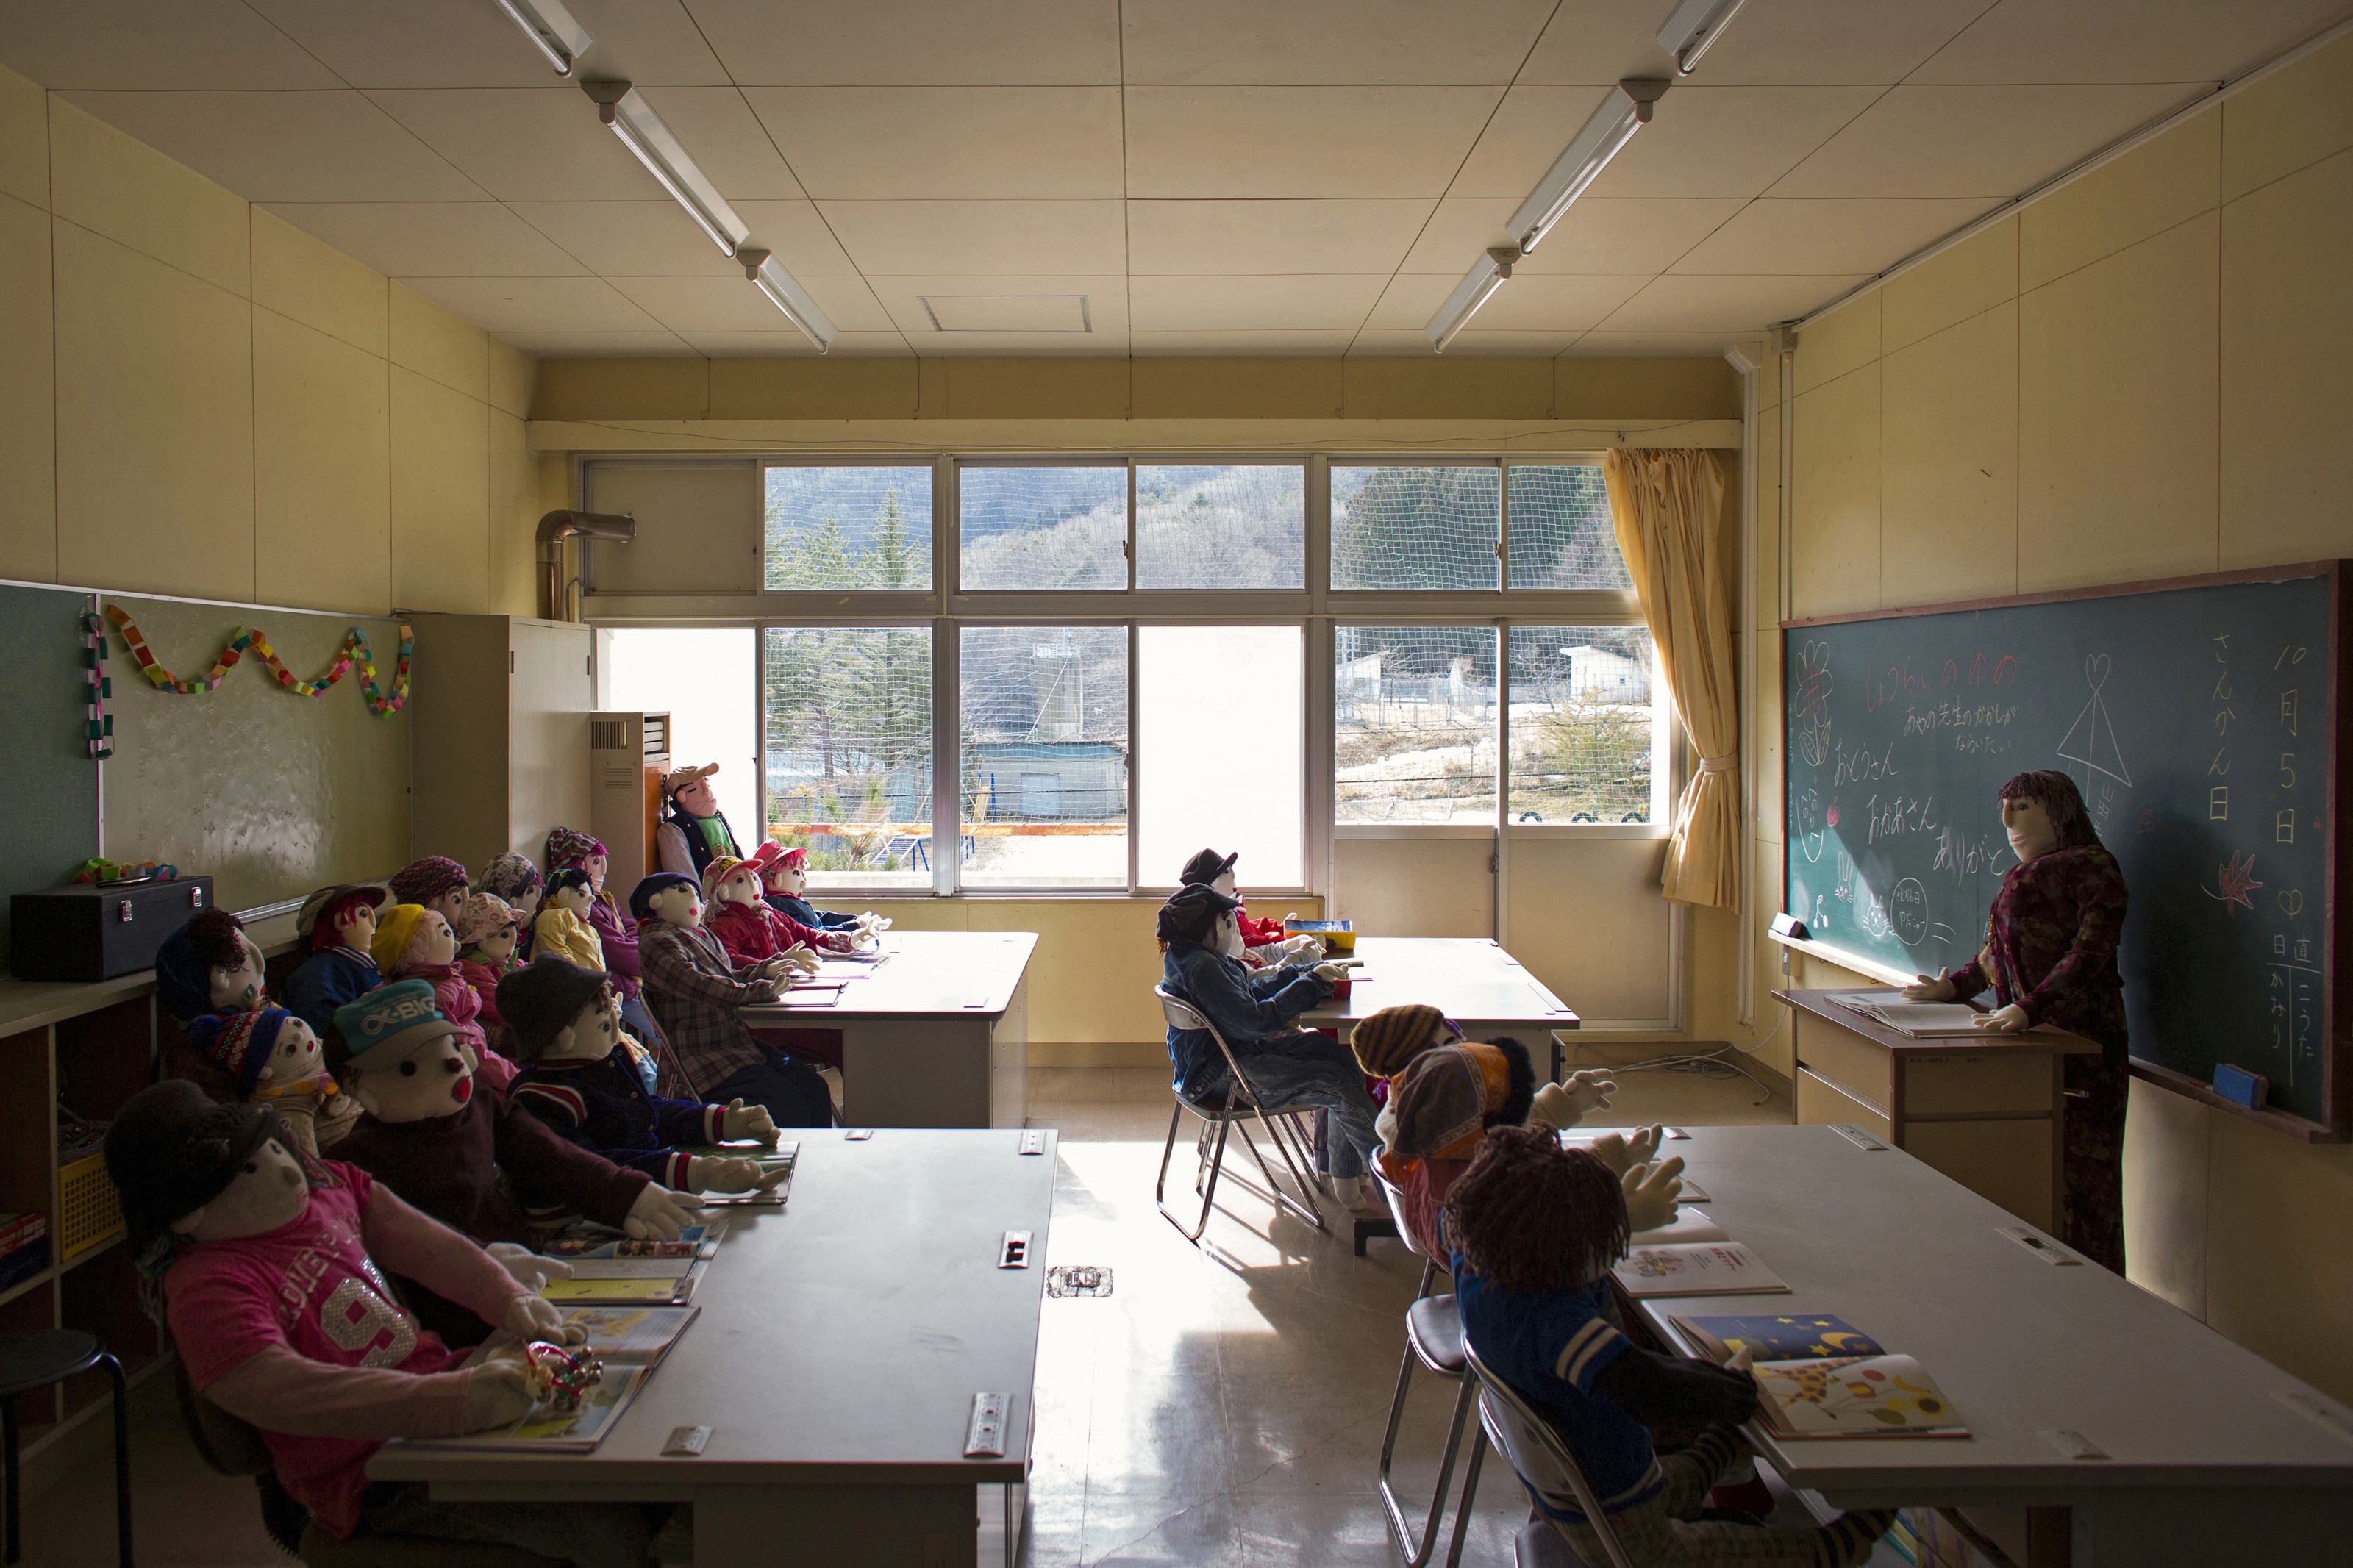 Scarecrows representing former pupils and a teacher sit in a classroom in a closed down school in the village of Nagoro on Shikoku Island in southern Japan February 24, 2015.